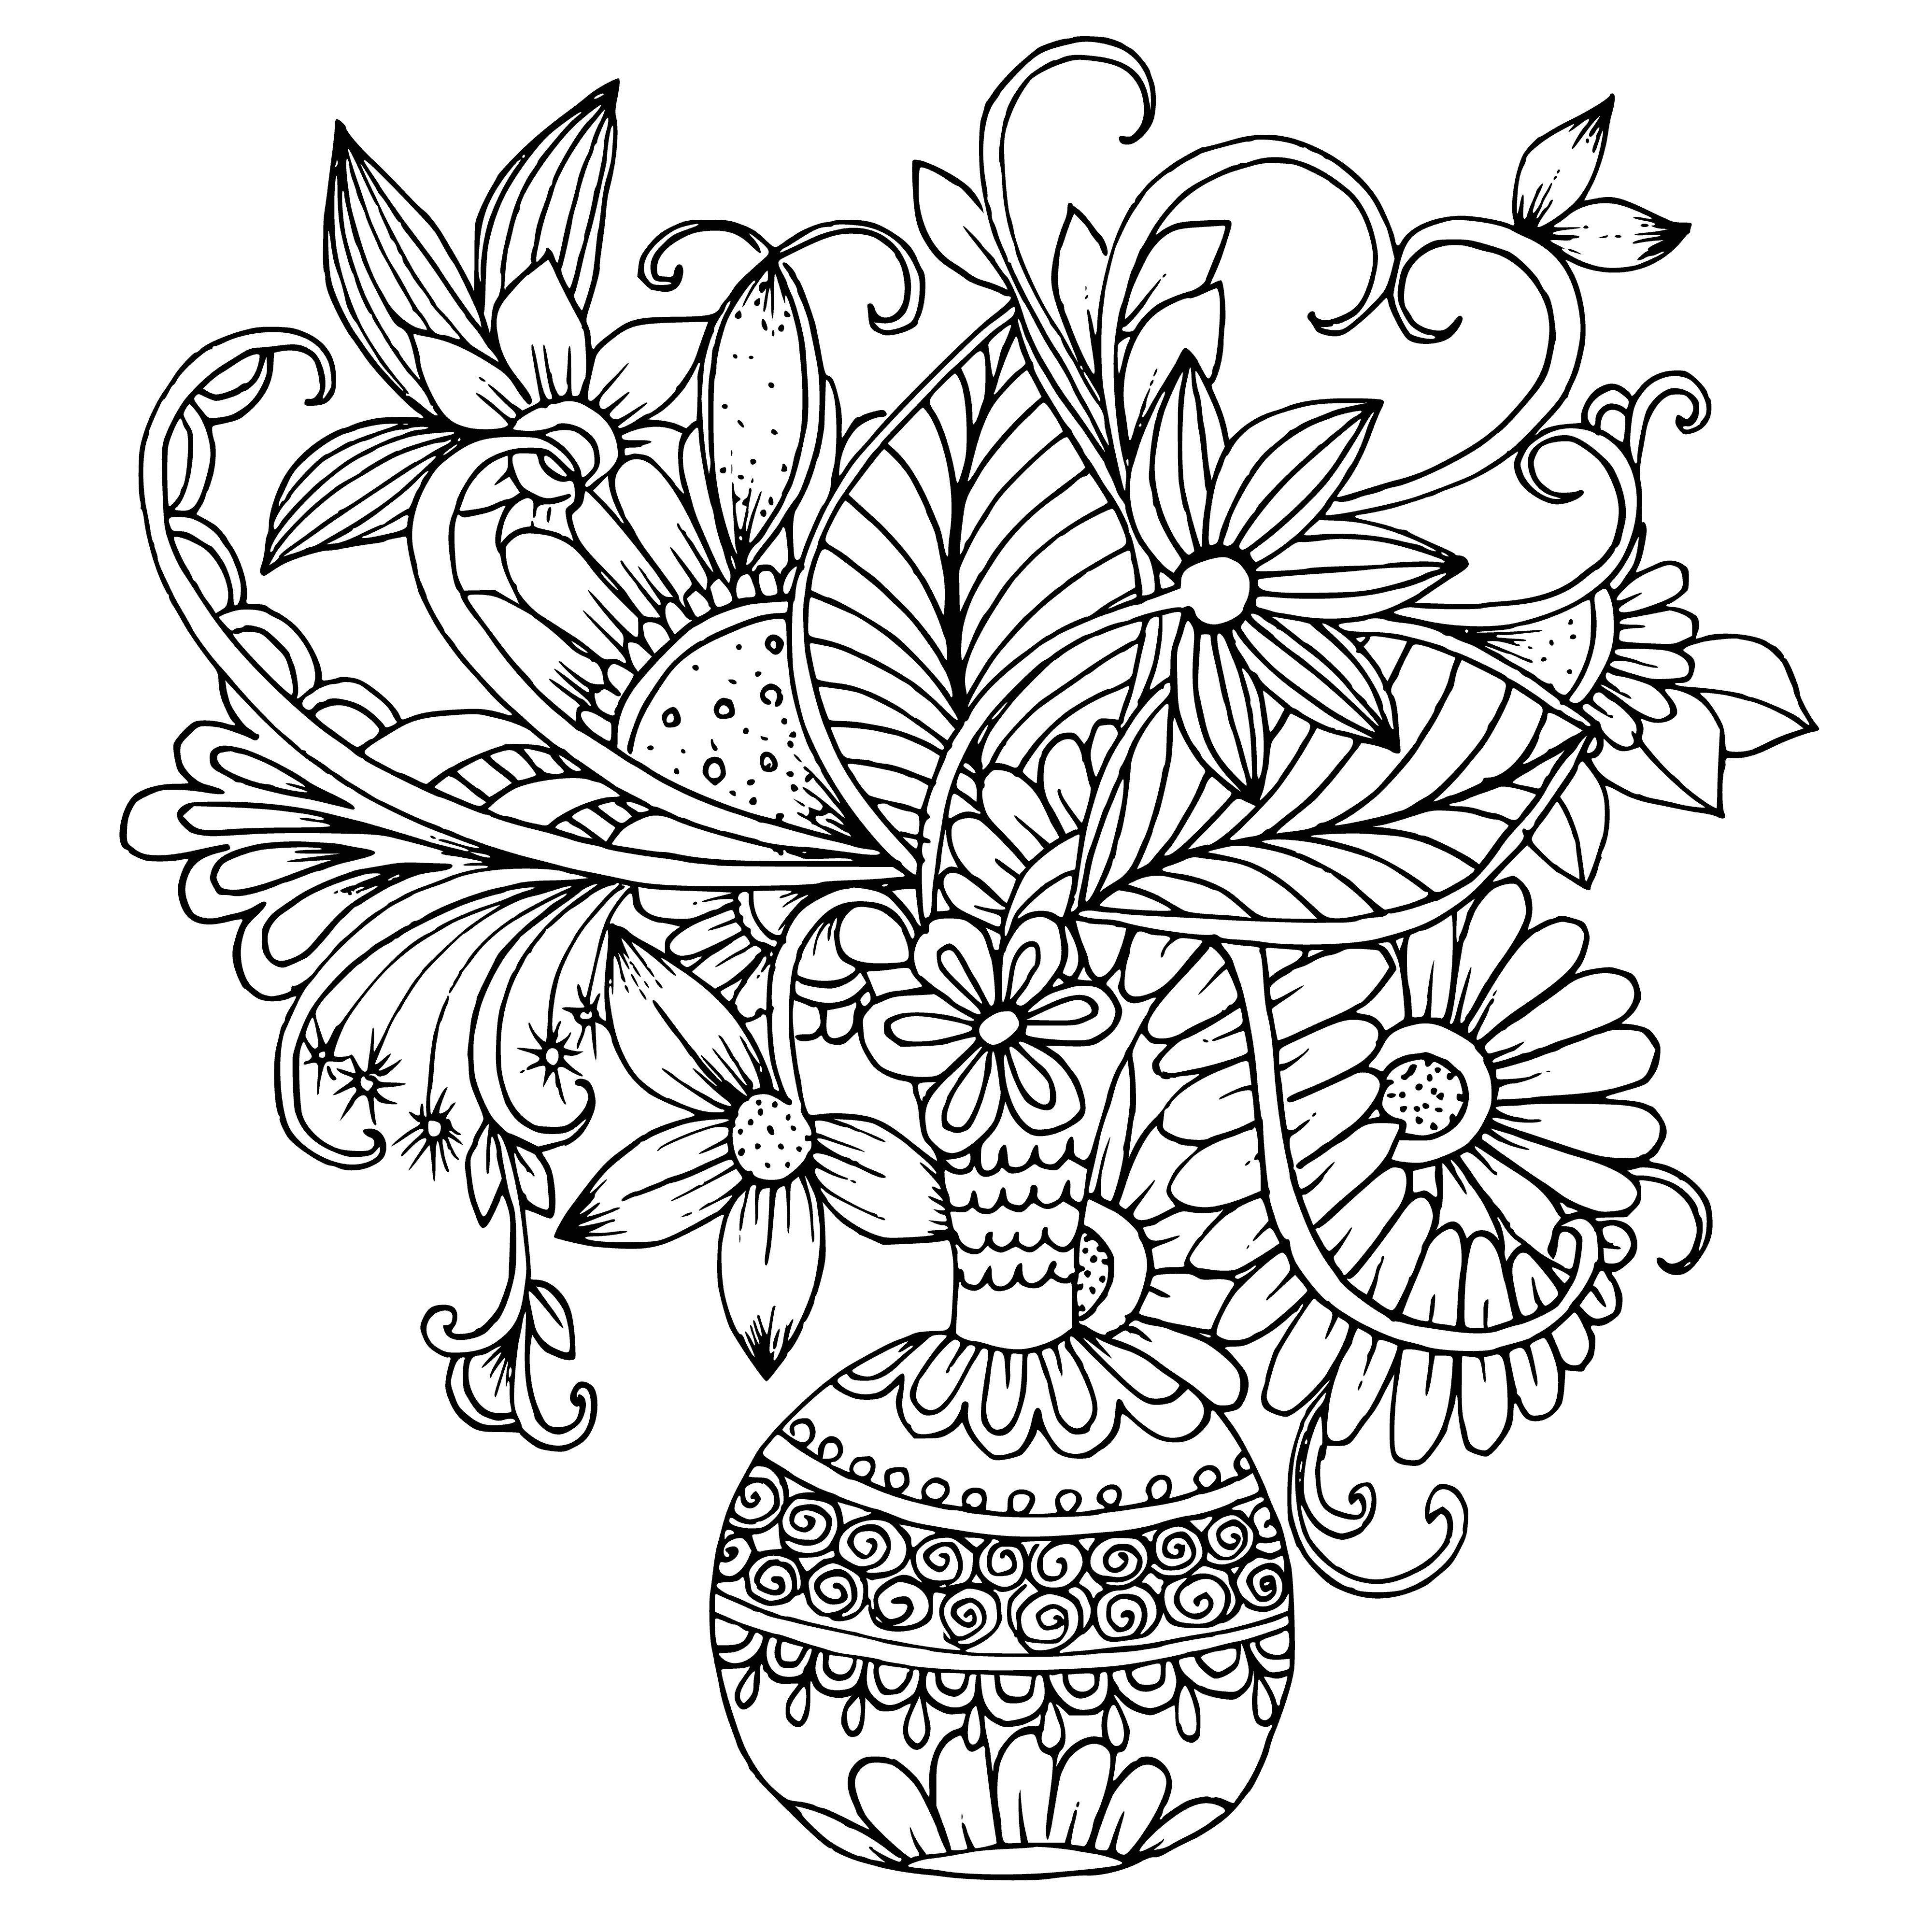 coloring page: Vase is filled with colorful flowers in vibrant hues of pink, purple, blue, & orange; green leaves provide contrast.